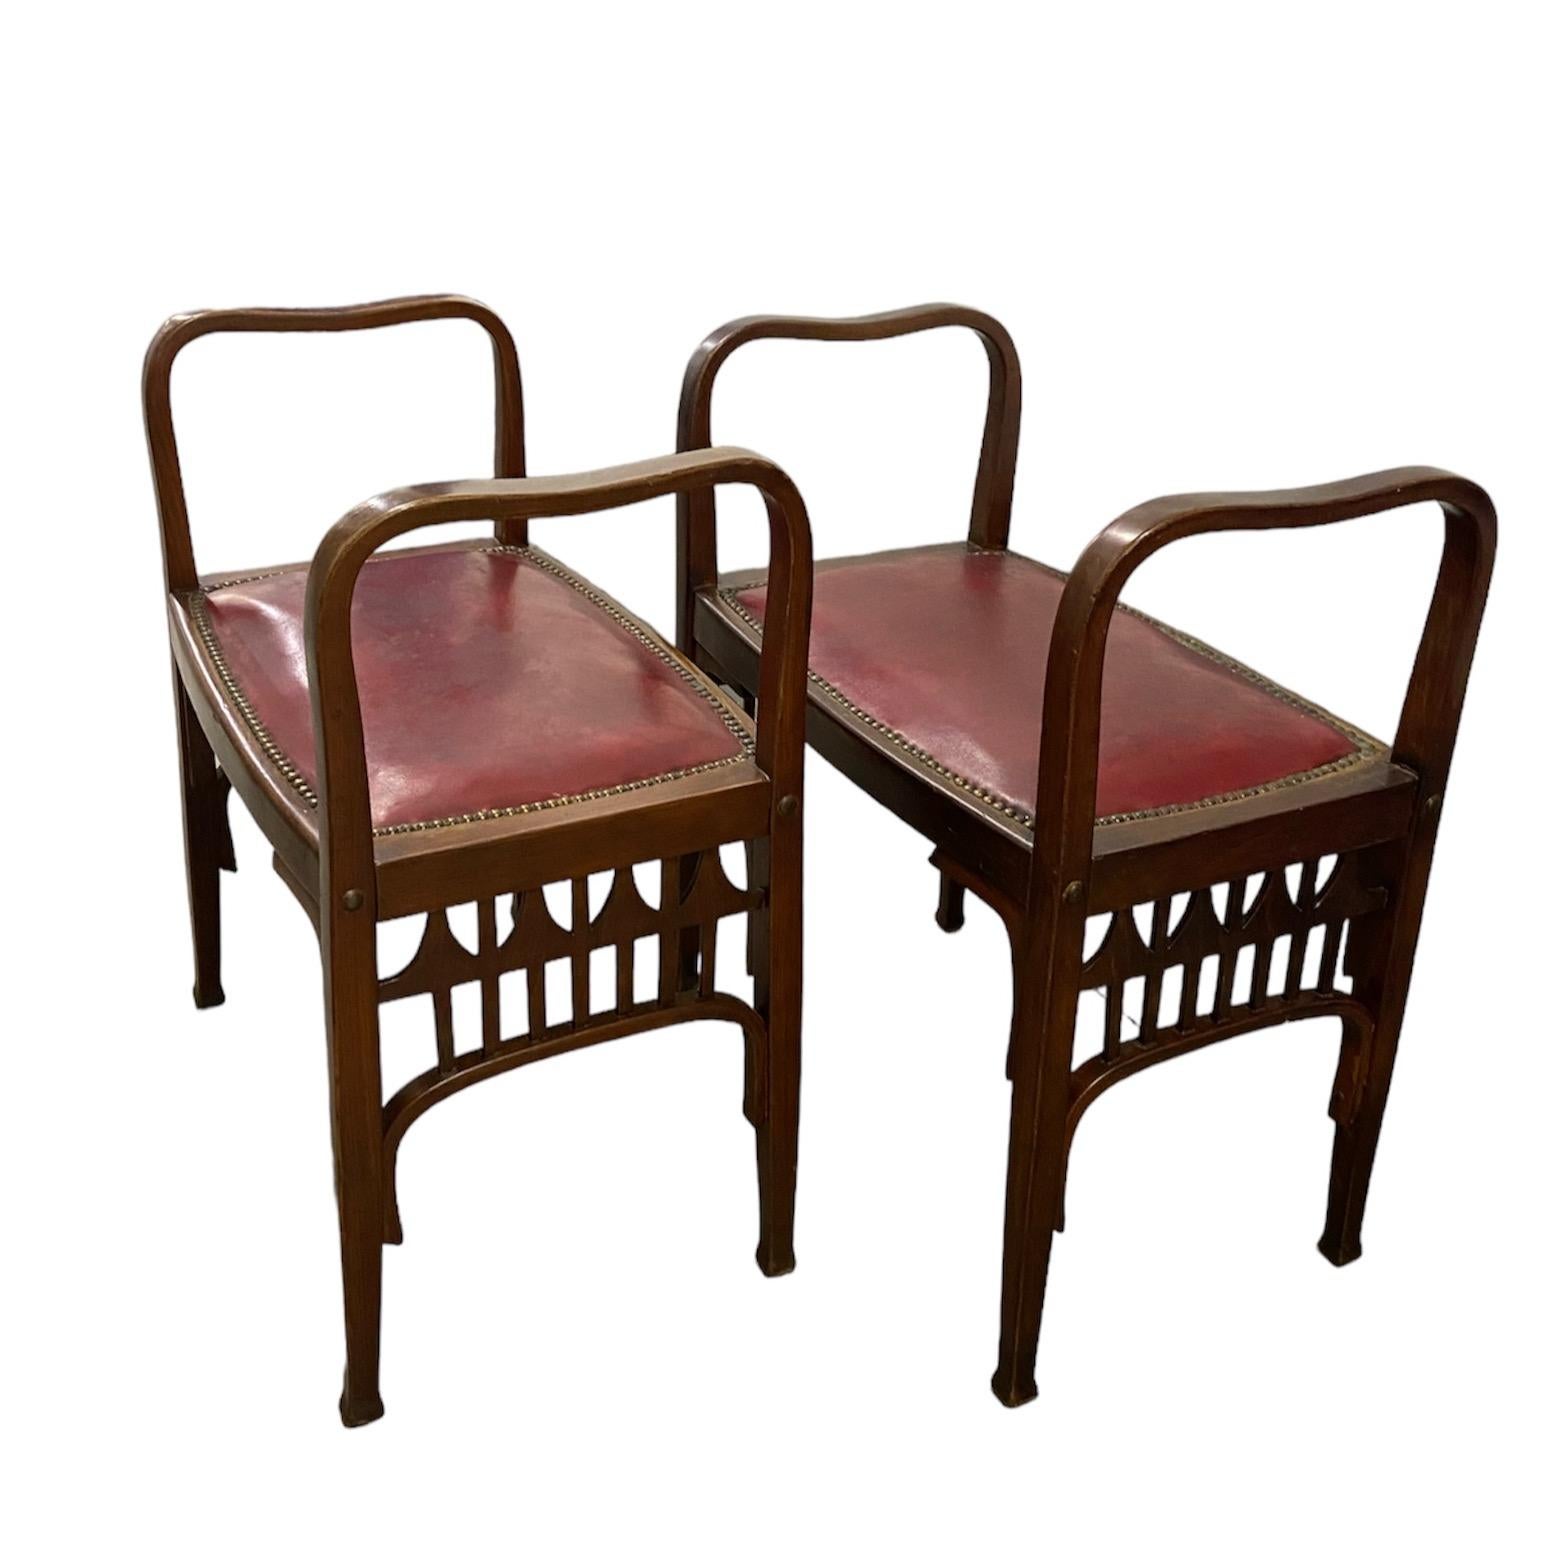 Pair of Austrian Secessionist Bentwood Stools, Benches or Causeuses, early 20thC In Good Condition For Sale In London, GB